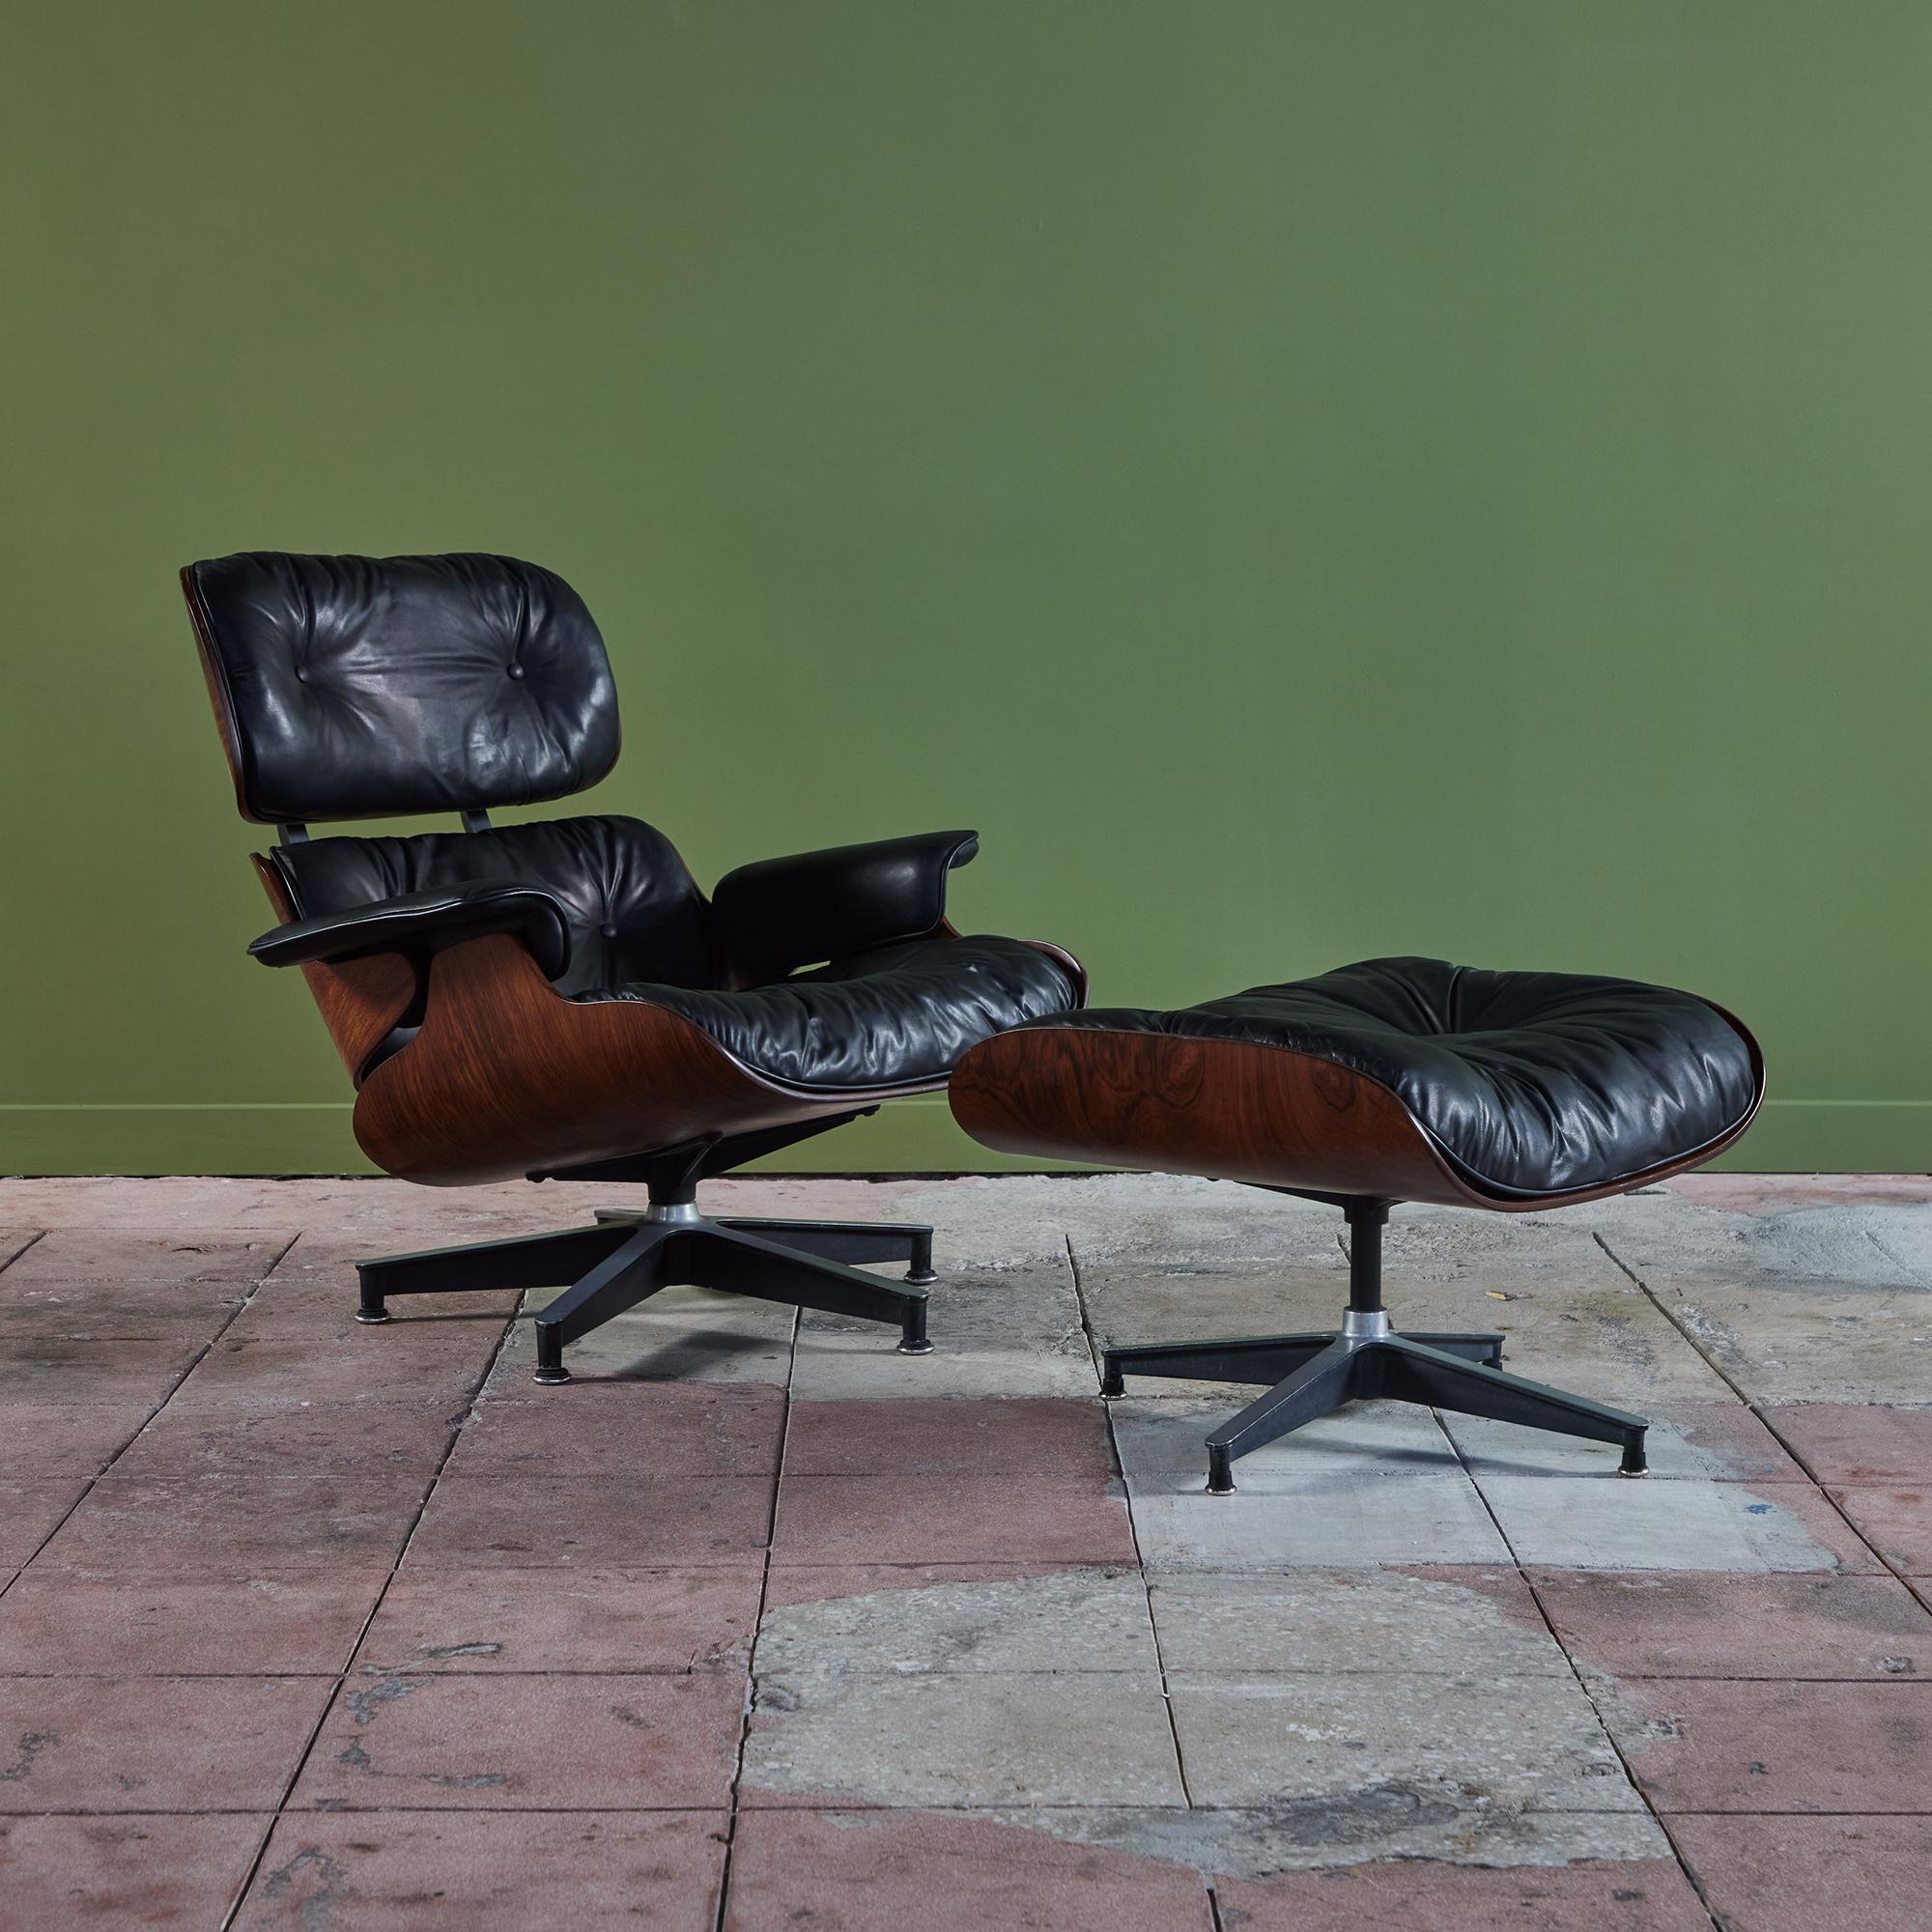 A rare 1956 first year production of the iconic 670/671 lounge chair with spinning ottoman by Ray and Charles Eames for Herman Miller. The spinning ottoman was only made during the first round of production because shortly thereafter, Ray and